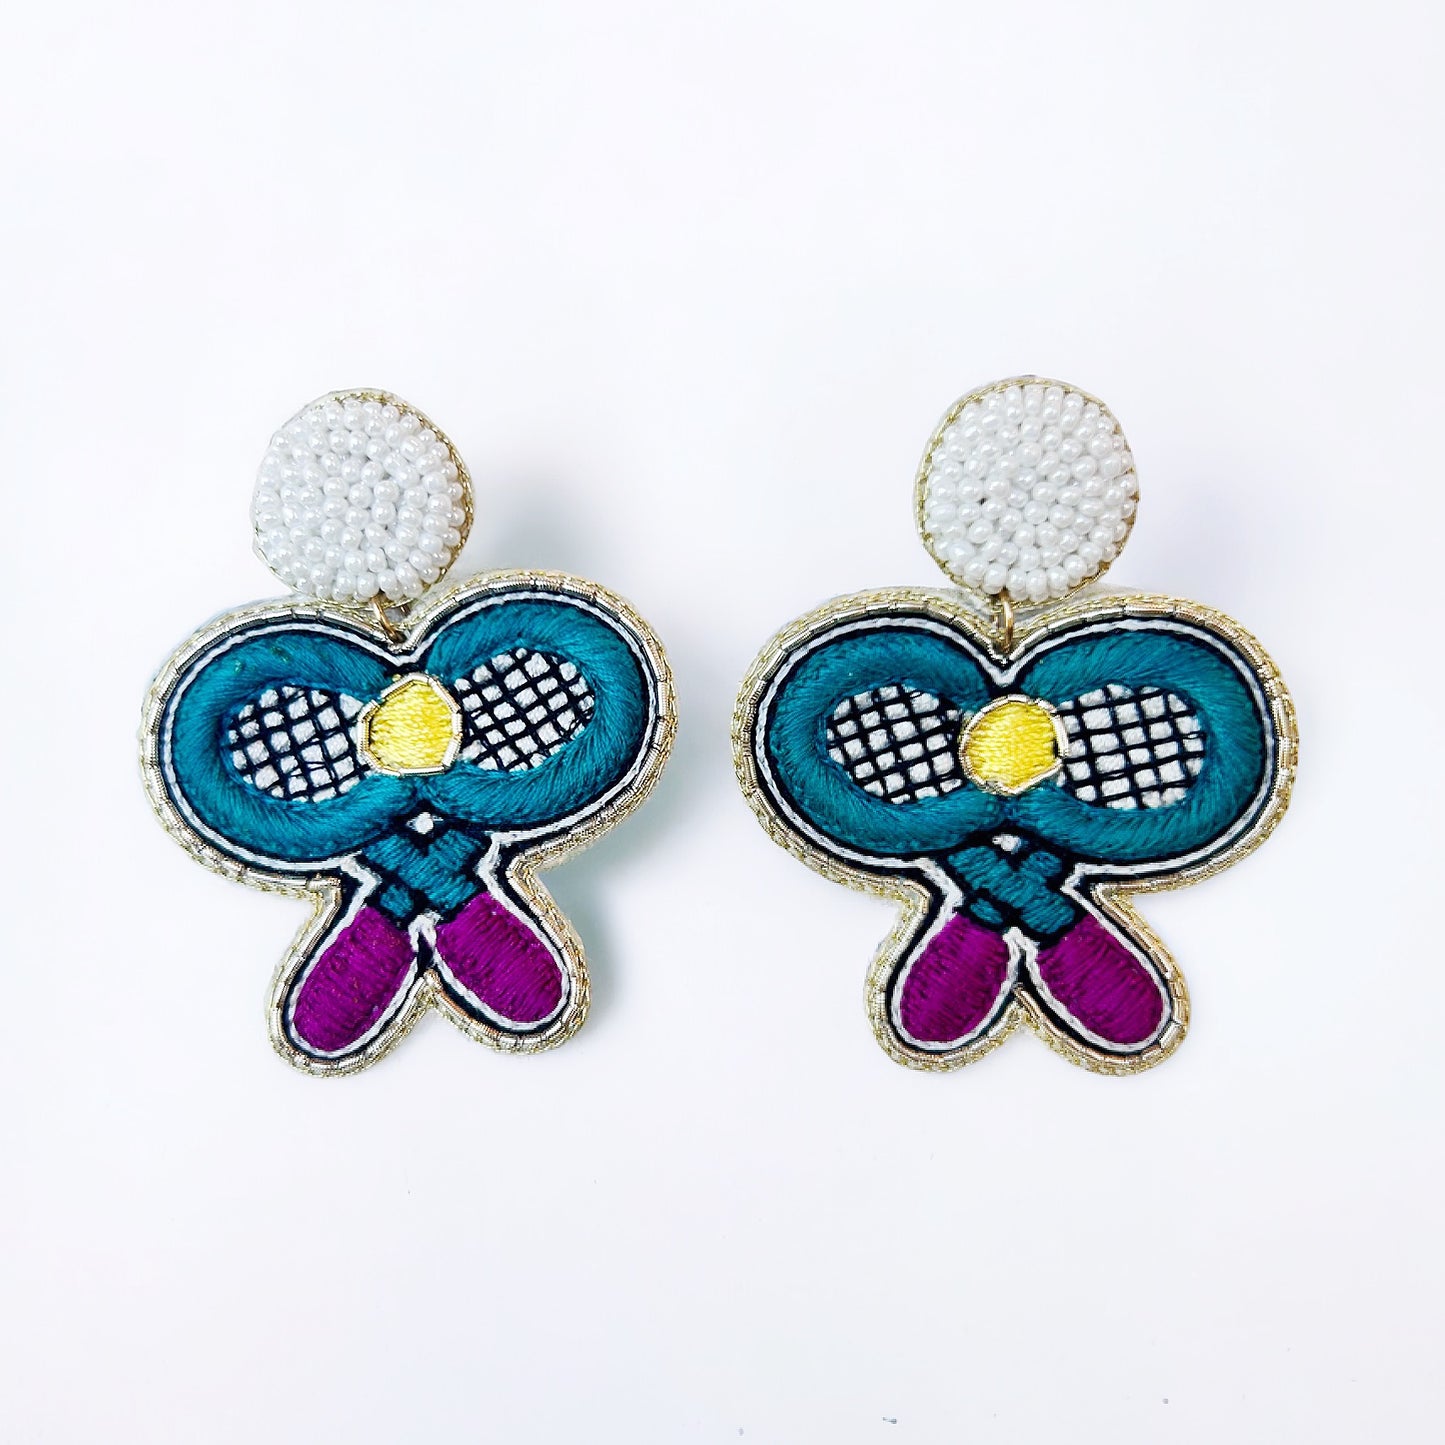 Beaded and Embroidered Tennis Rackets Earrings